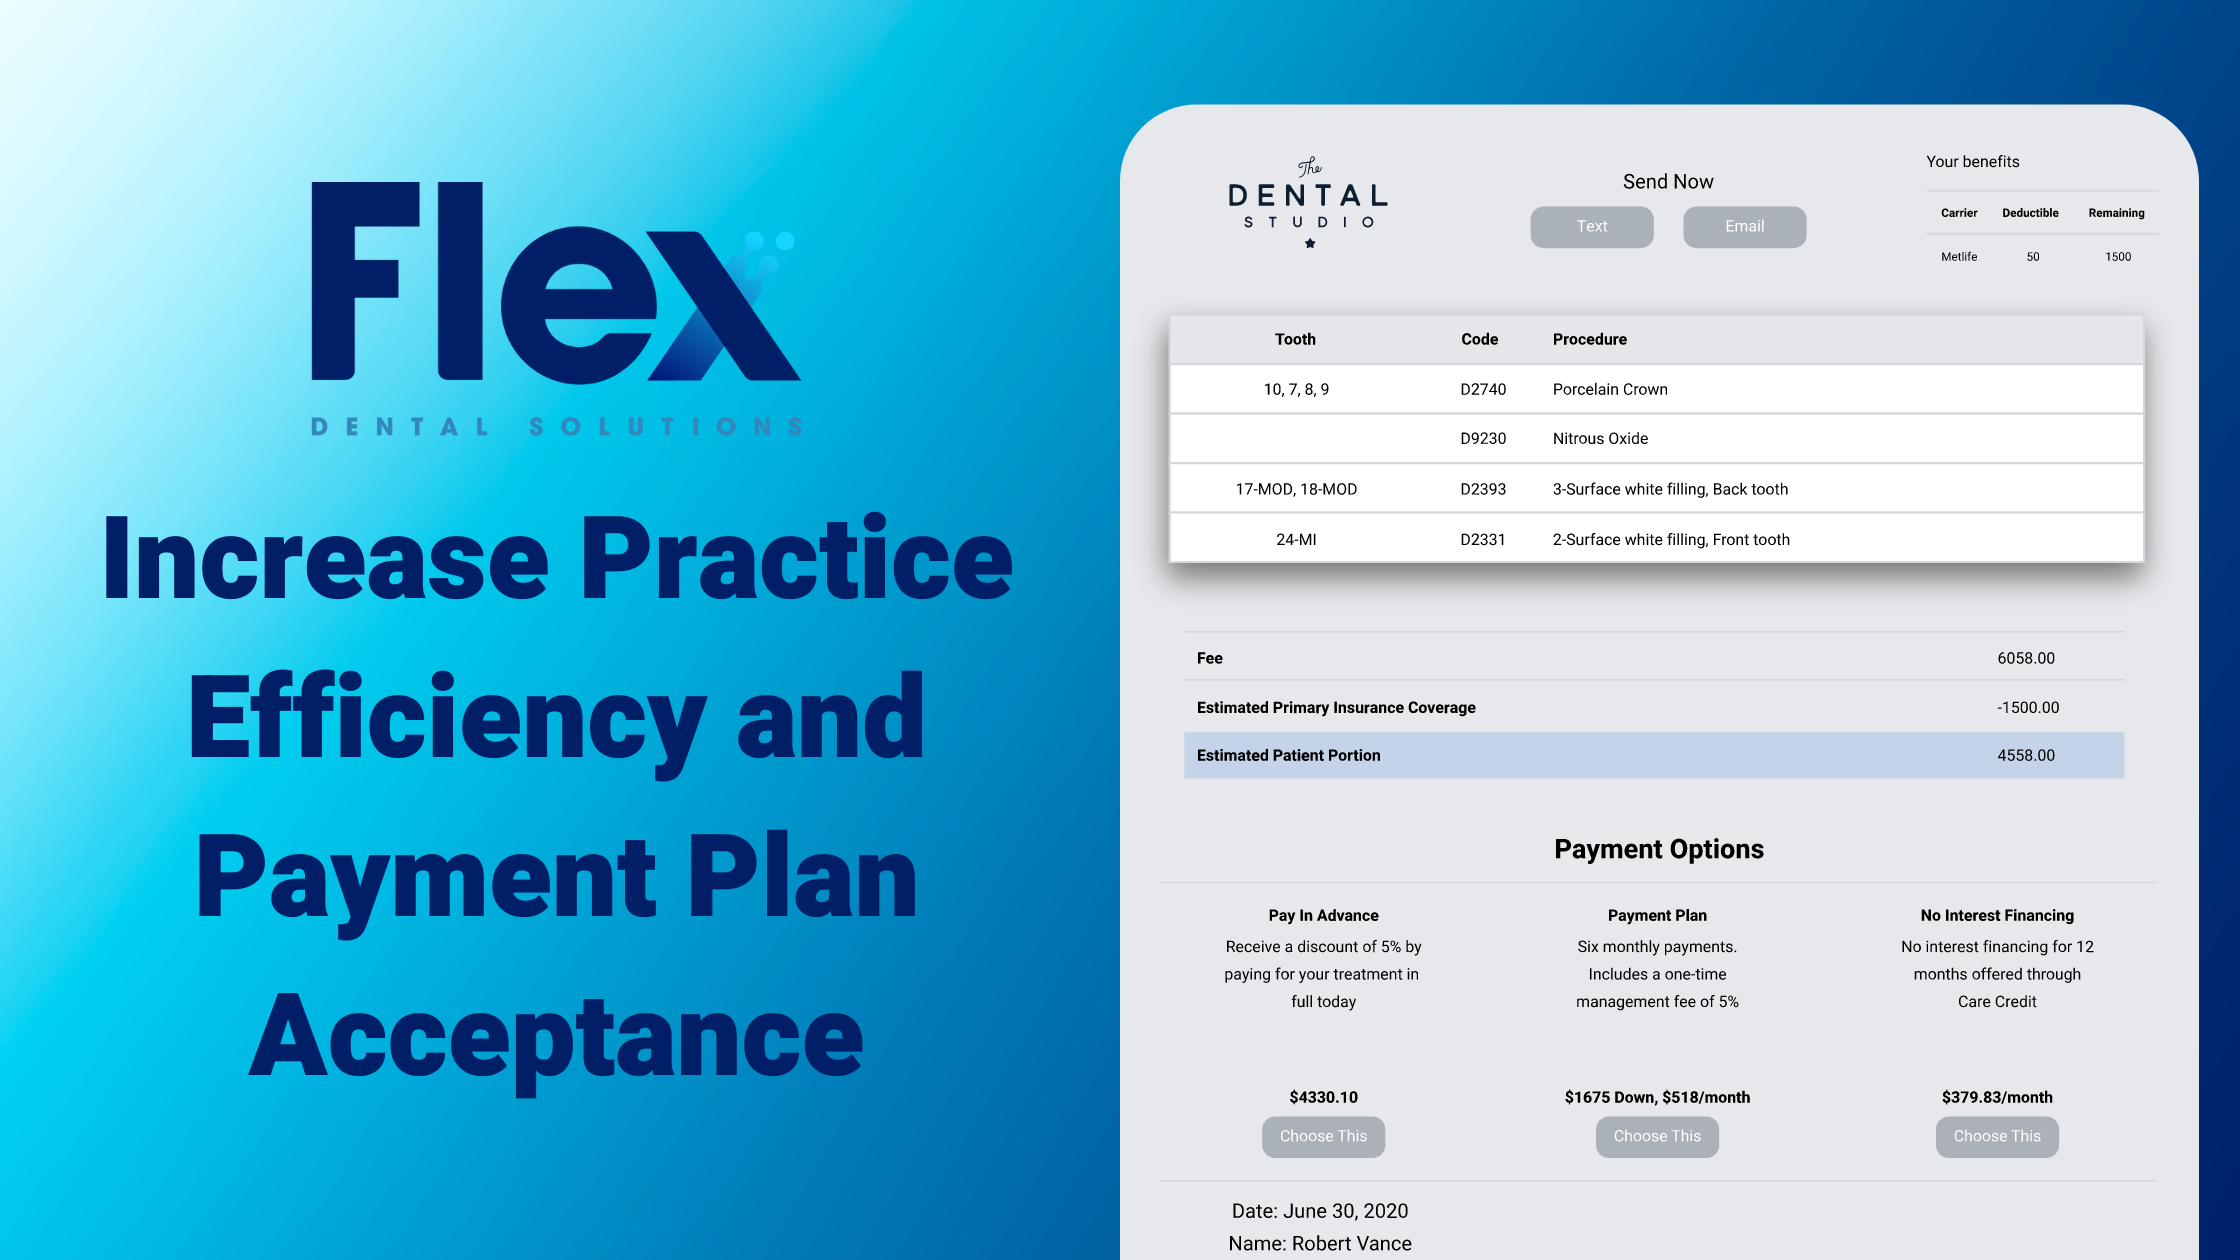 Increase Practice Efficiency and Payment Plan Accpetance